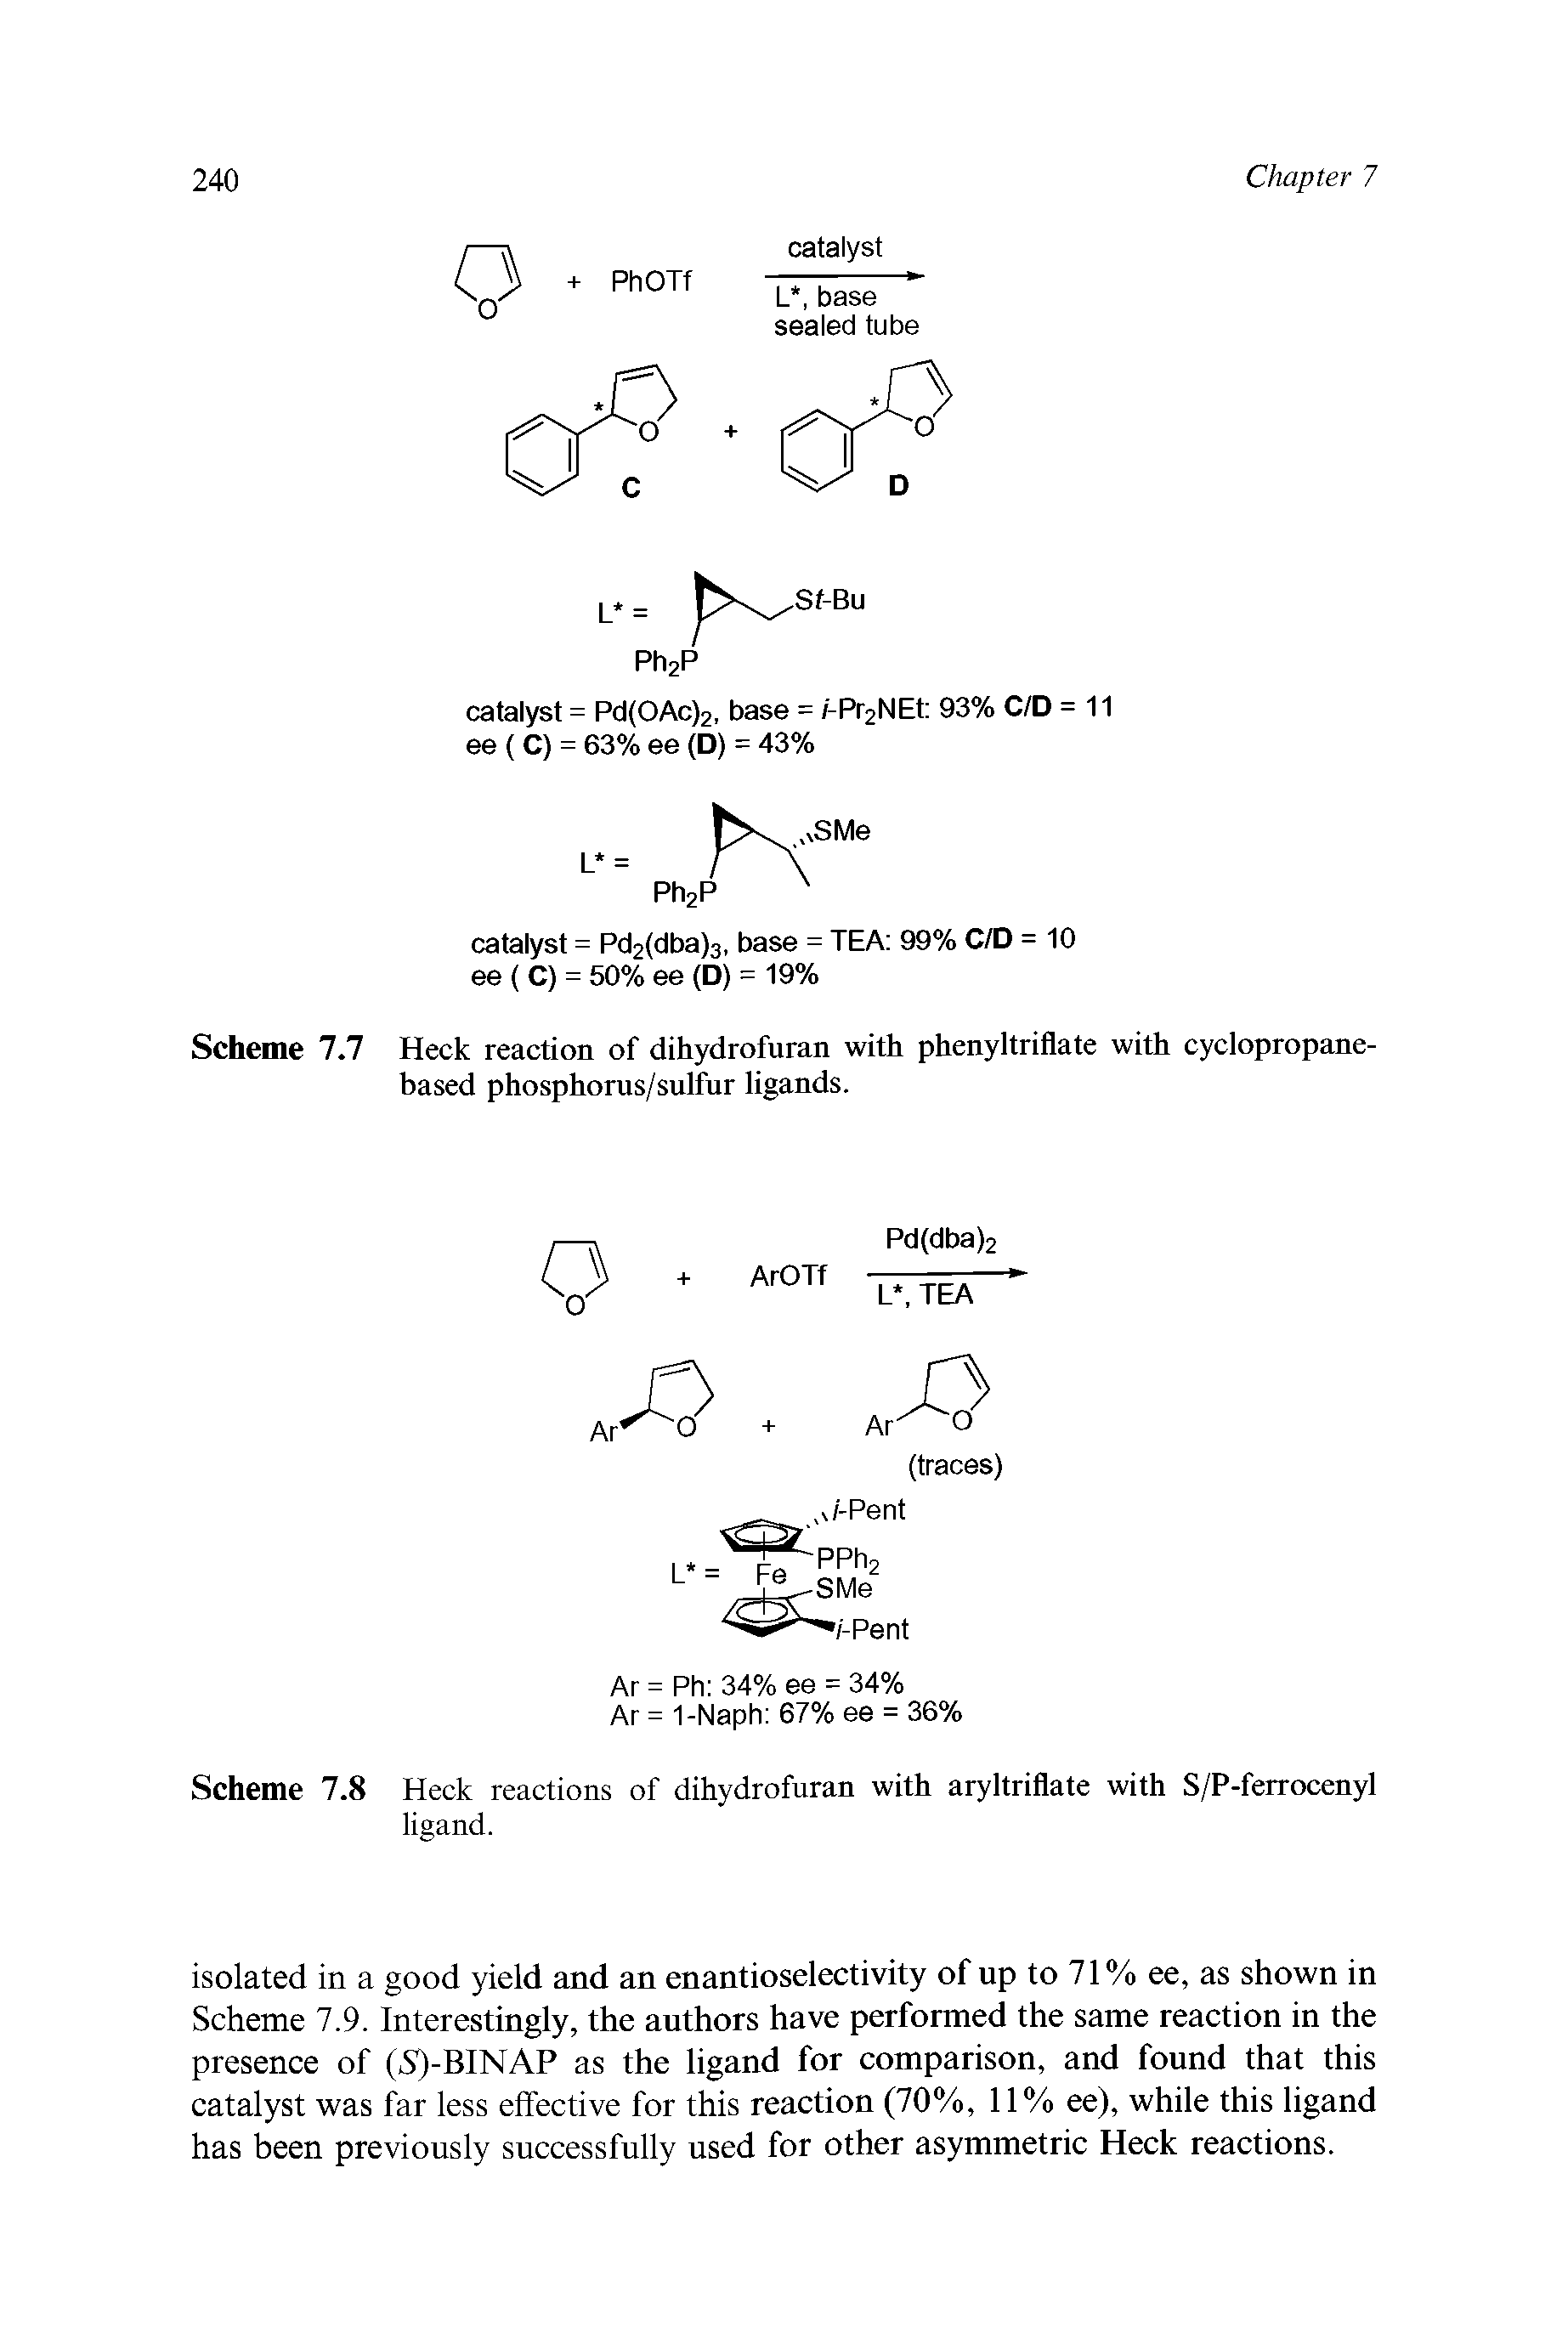 Scheme 7.7 Heck reaction of dihydrofuran with phenyltriflate with cyclopropane-based phosphorus/sulfur ligands.